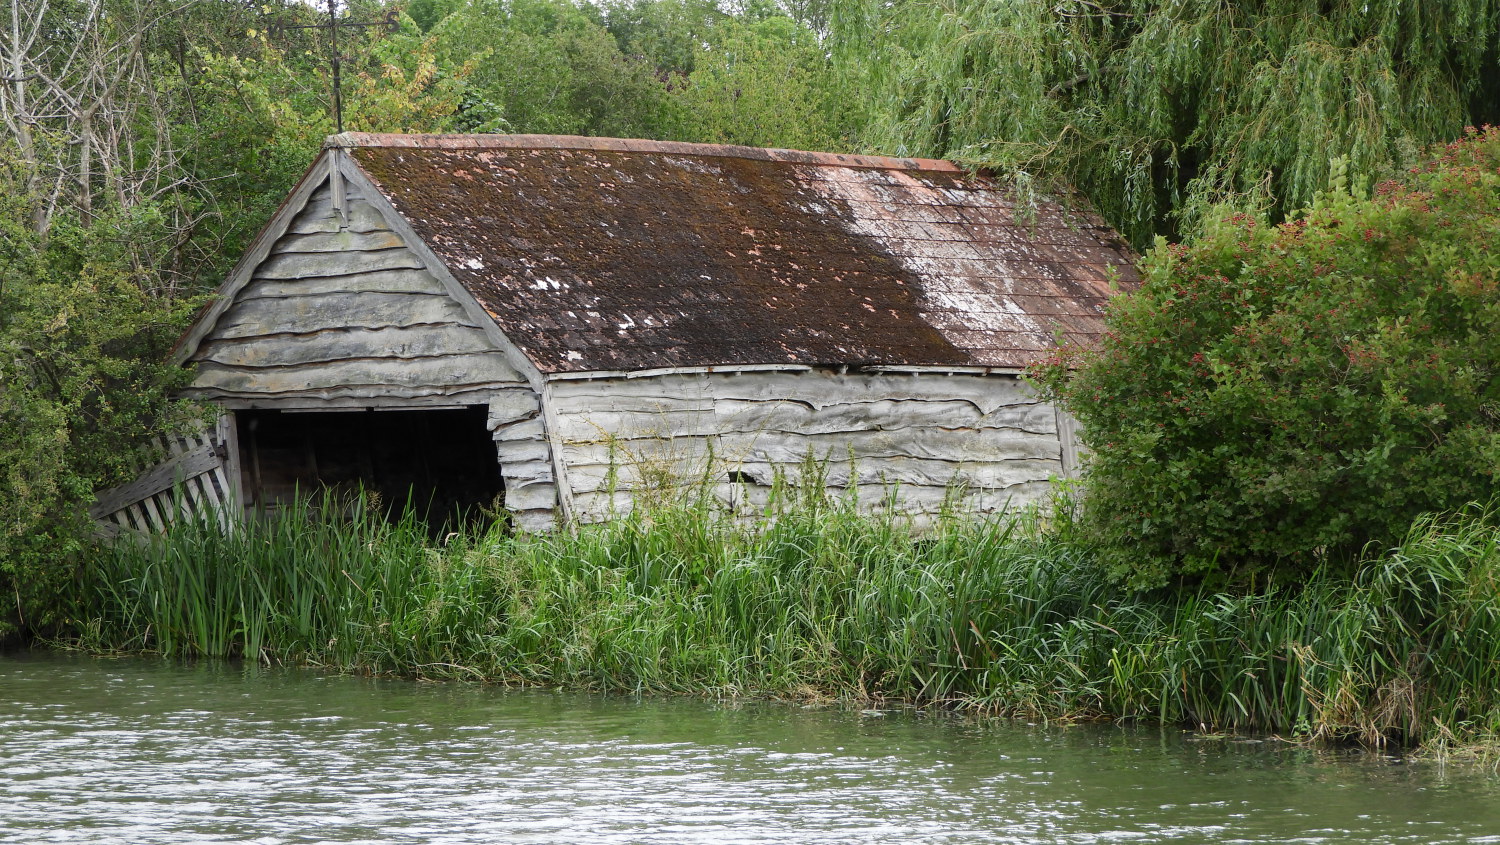 Boathouse in need of TLC